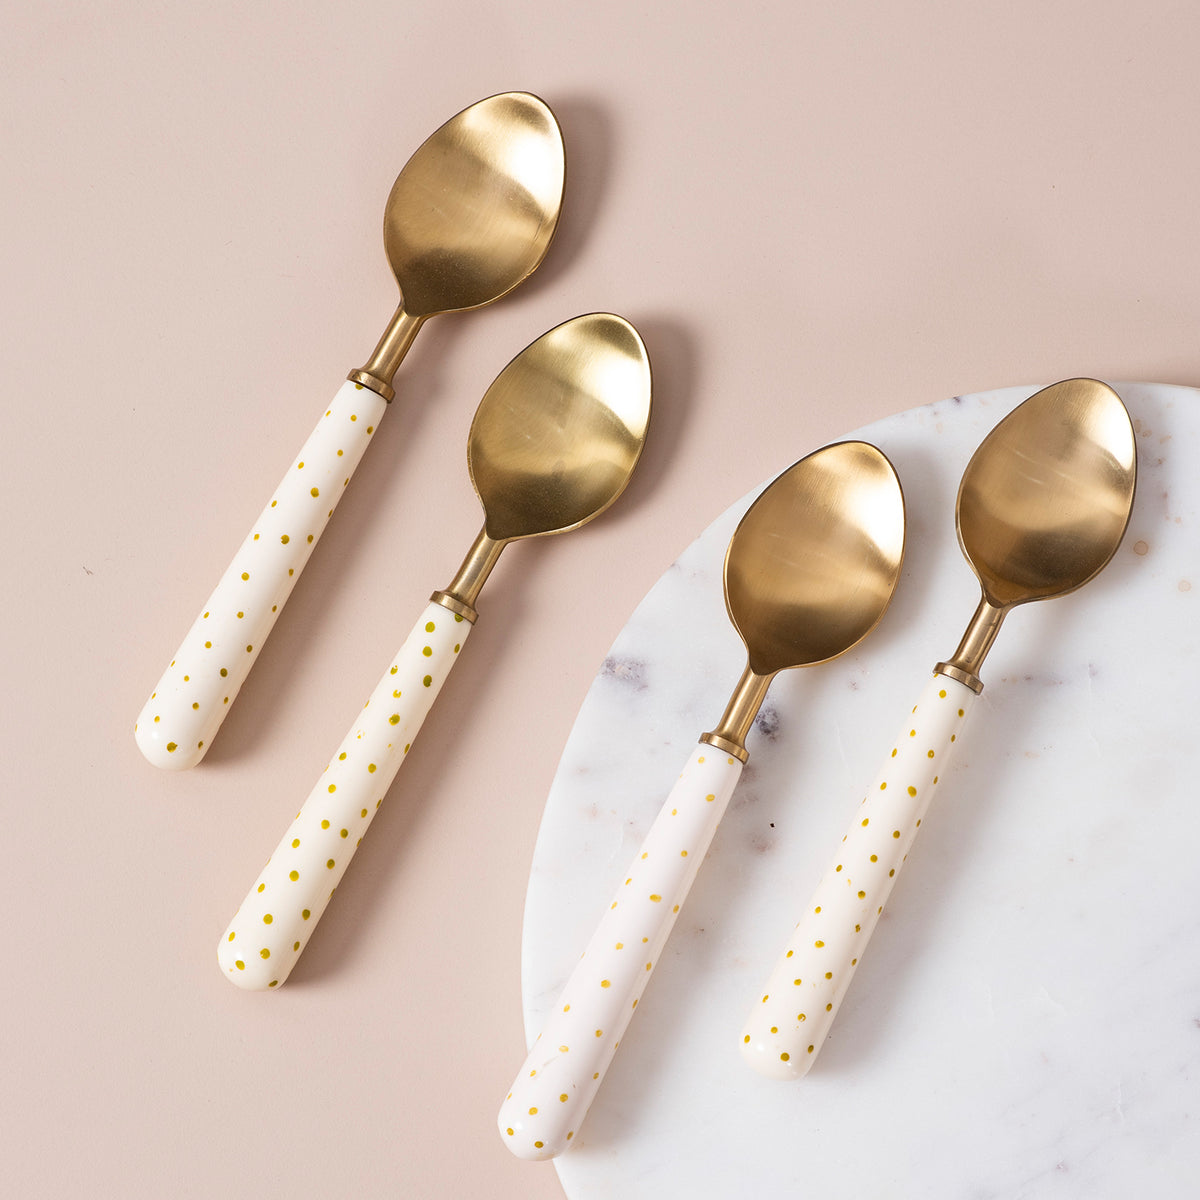 Gold Spoon Set of 4 